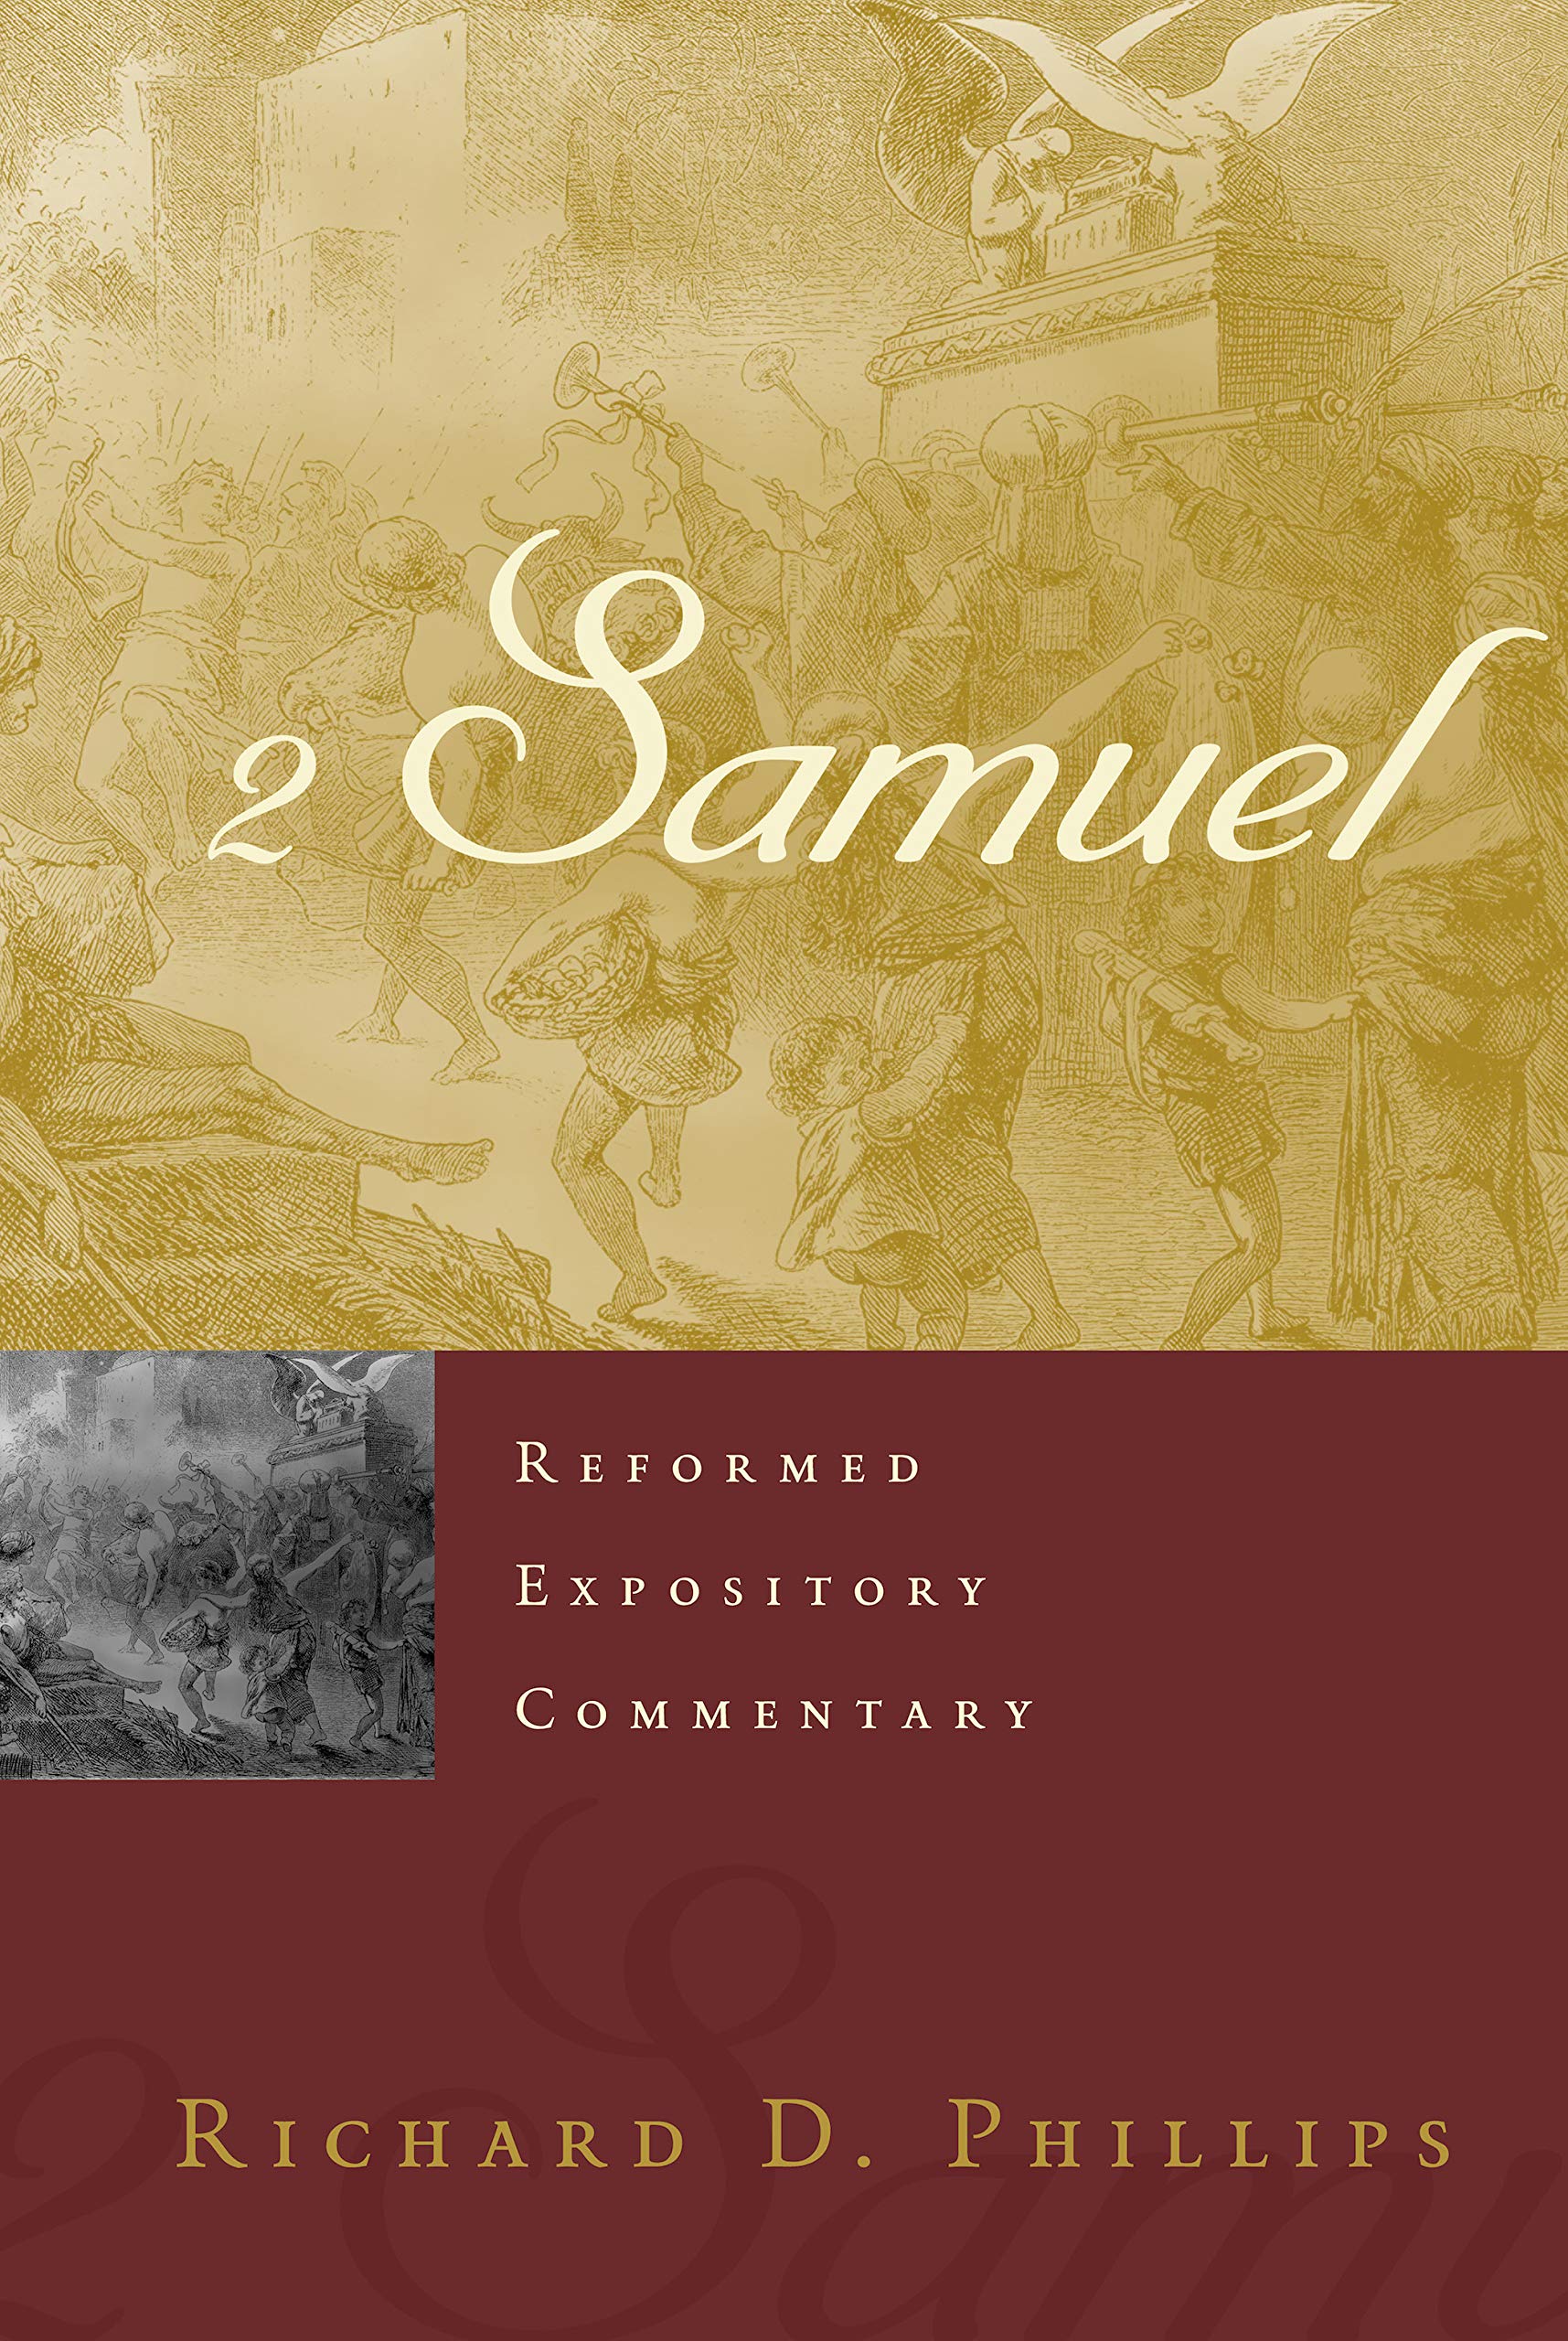 Book Notice: 2 SAMUEL (REFORMED EXPOSITORY COMMENTARY), by Richard D. Phillips